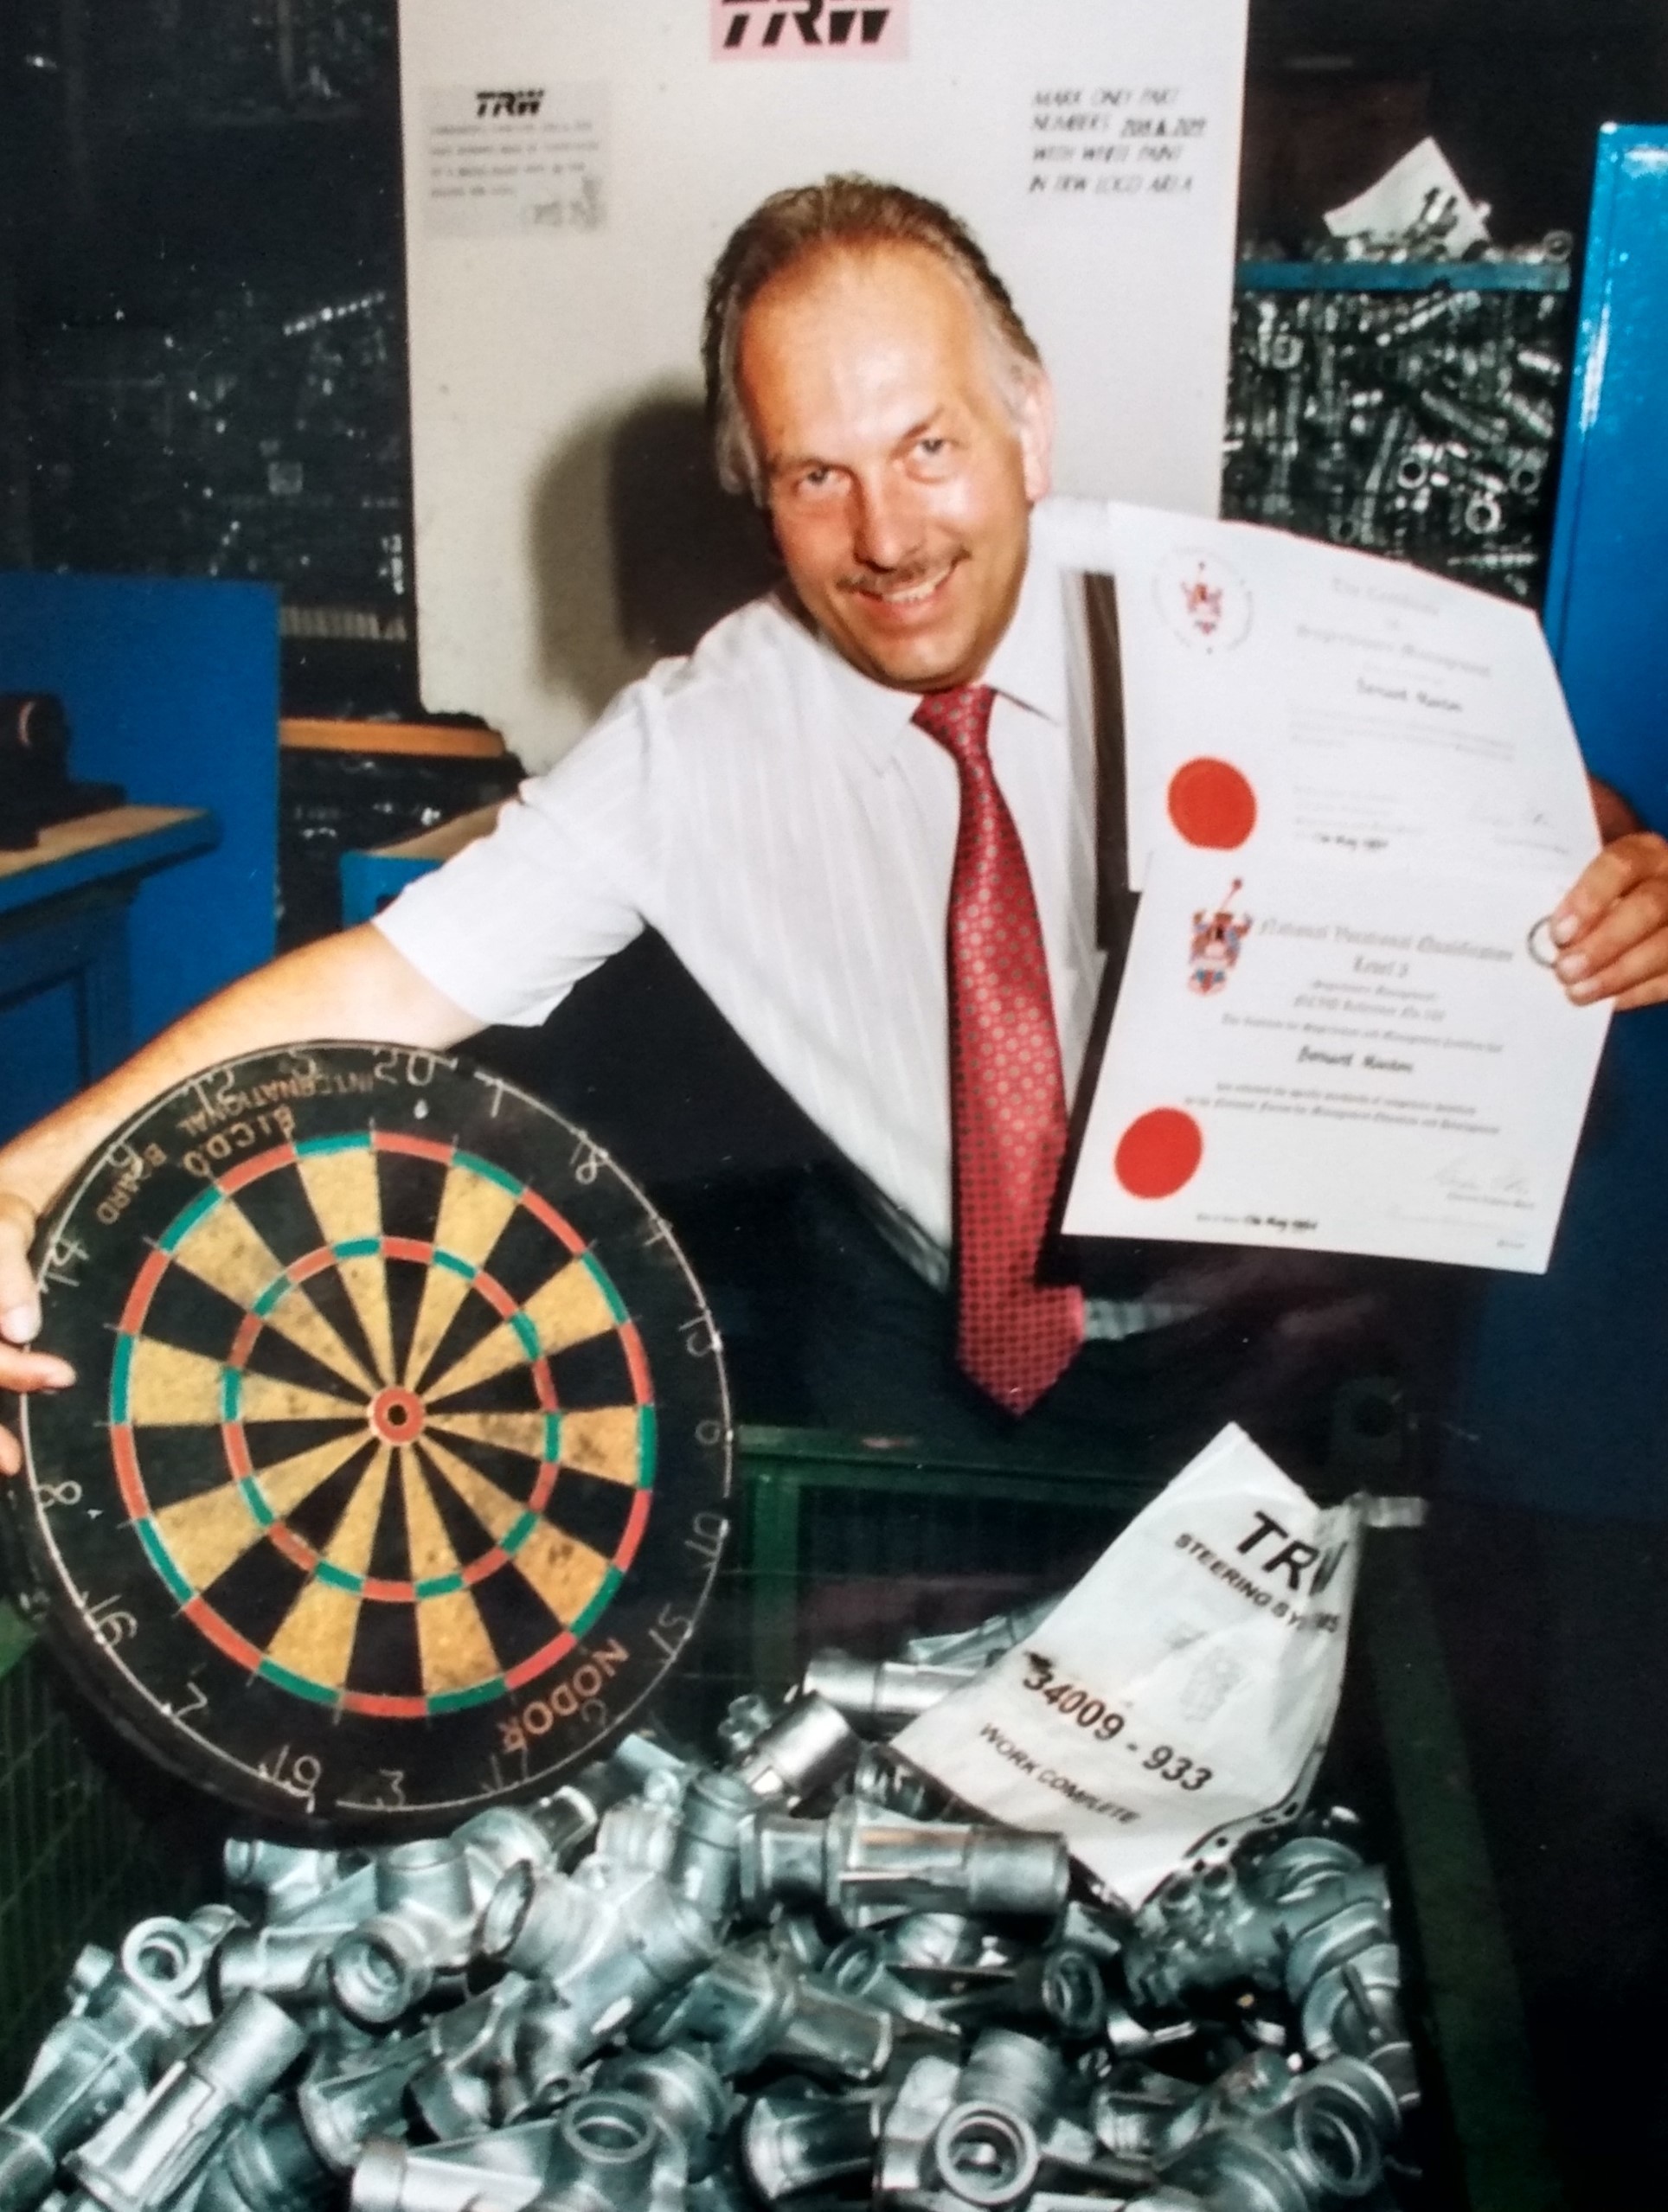 Former darts champion Bernard Manton, a chargehand trimmer at Metal Castings, had just taken his first step into management with his NVQ Level 3